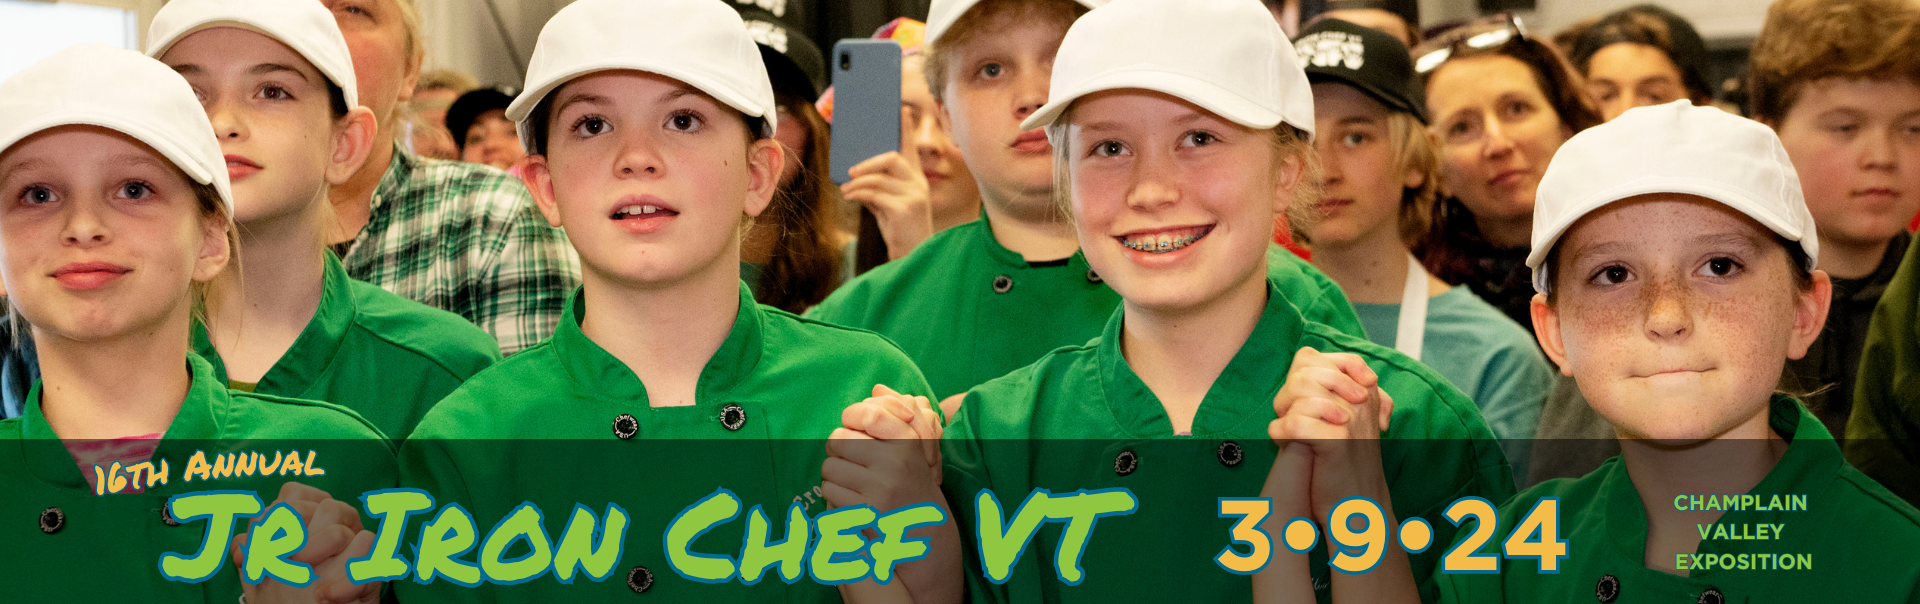 Jr Iron Chef VT - 3/9/24 - Champlain Valley Exposition. Image of young girls holding hands with looks of excitement.